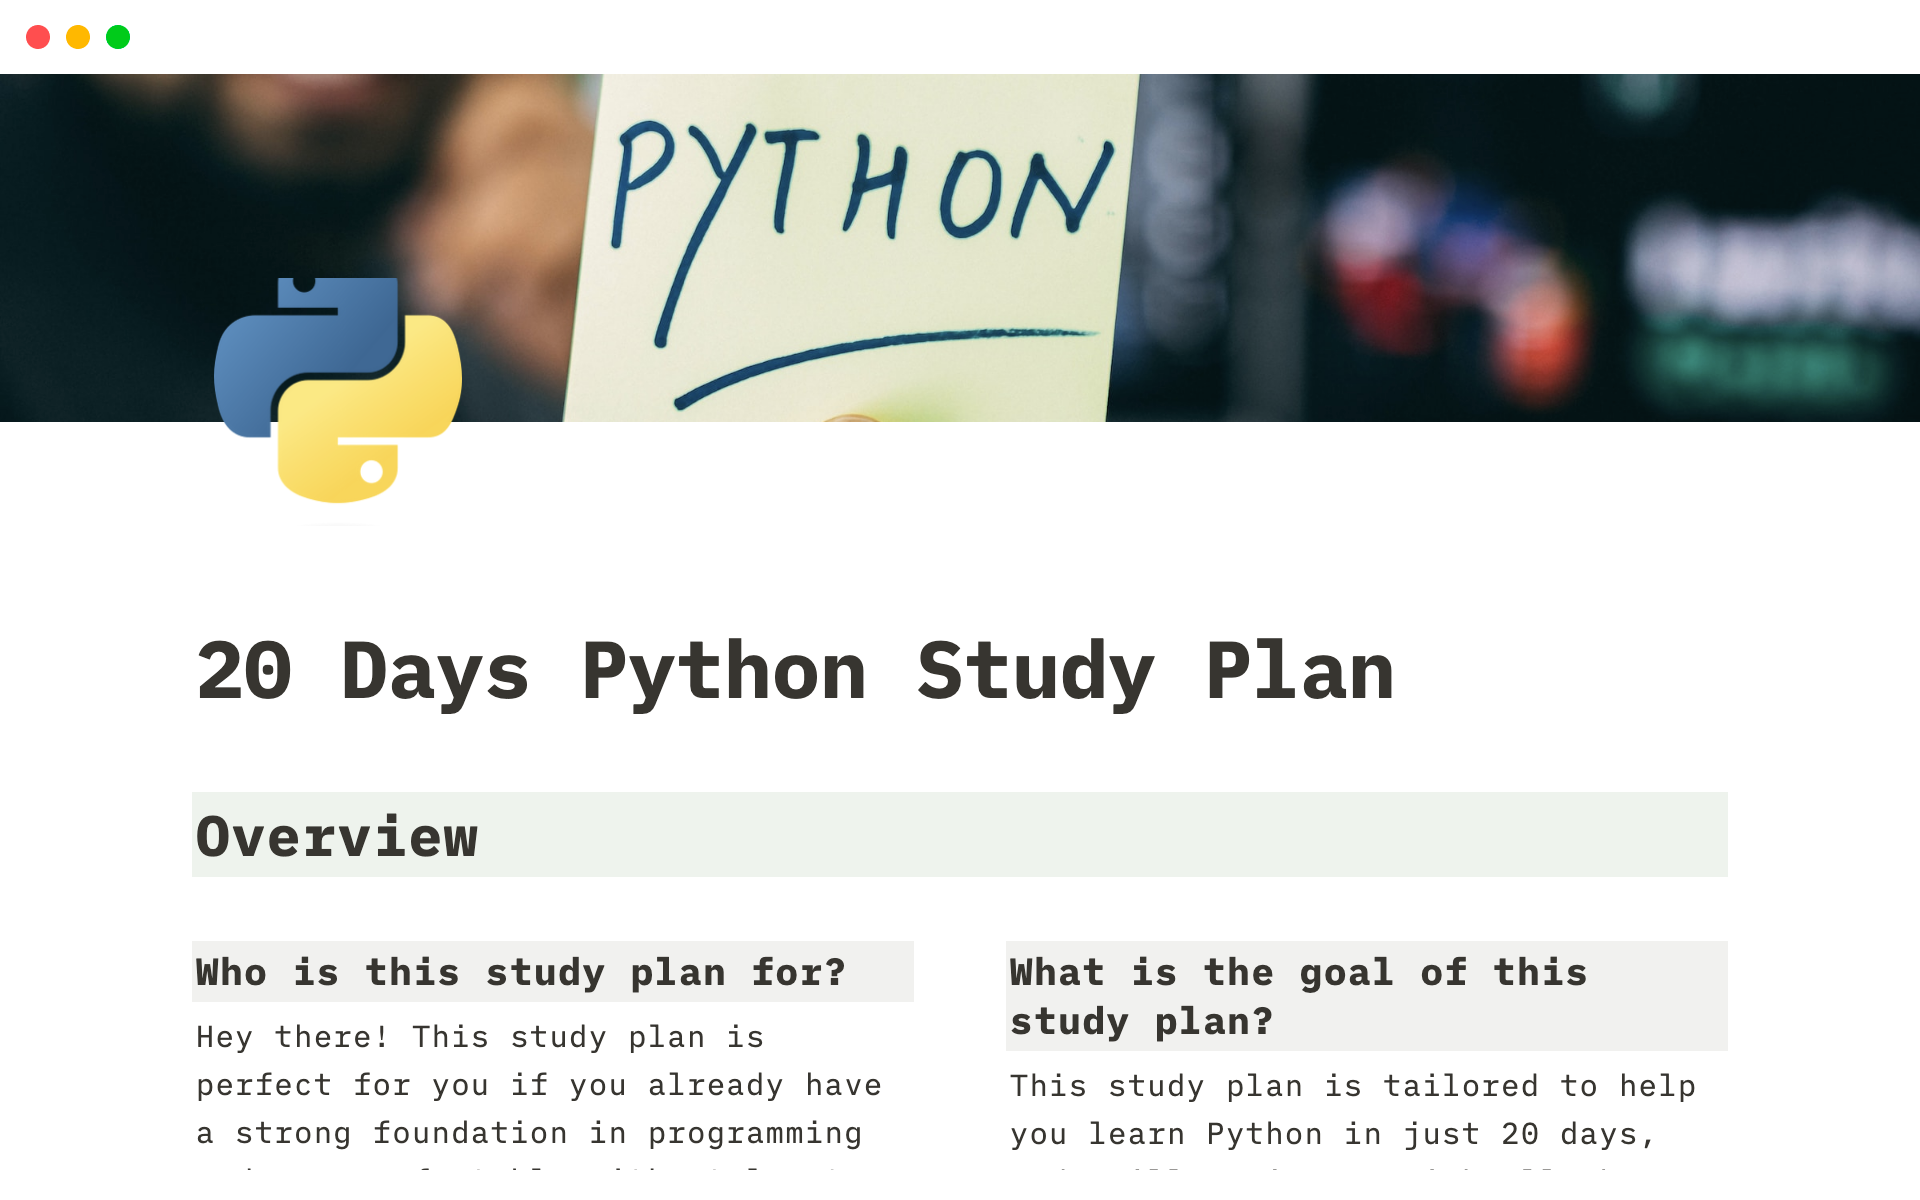 This study plan is tailored to help you learn Python in just 20 days, and  will equip you with all the foundational knowledge and practical skills you need to succeed.